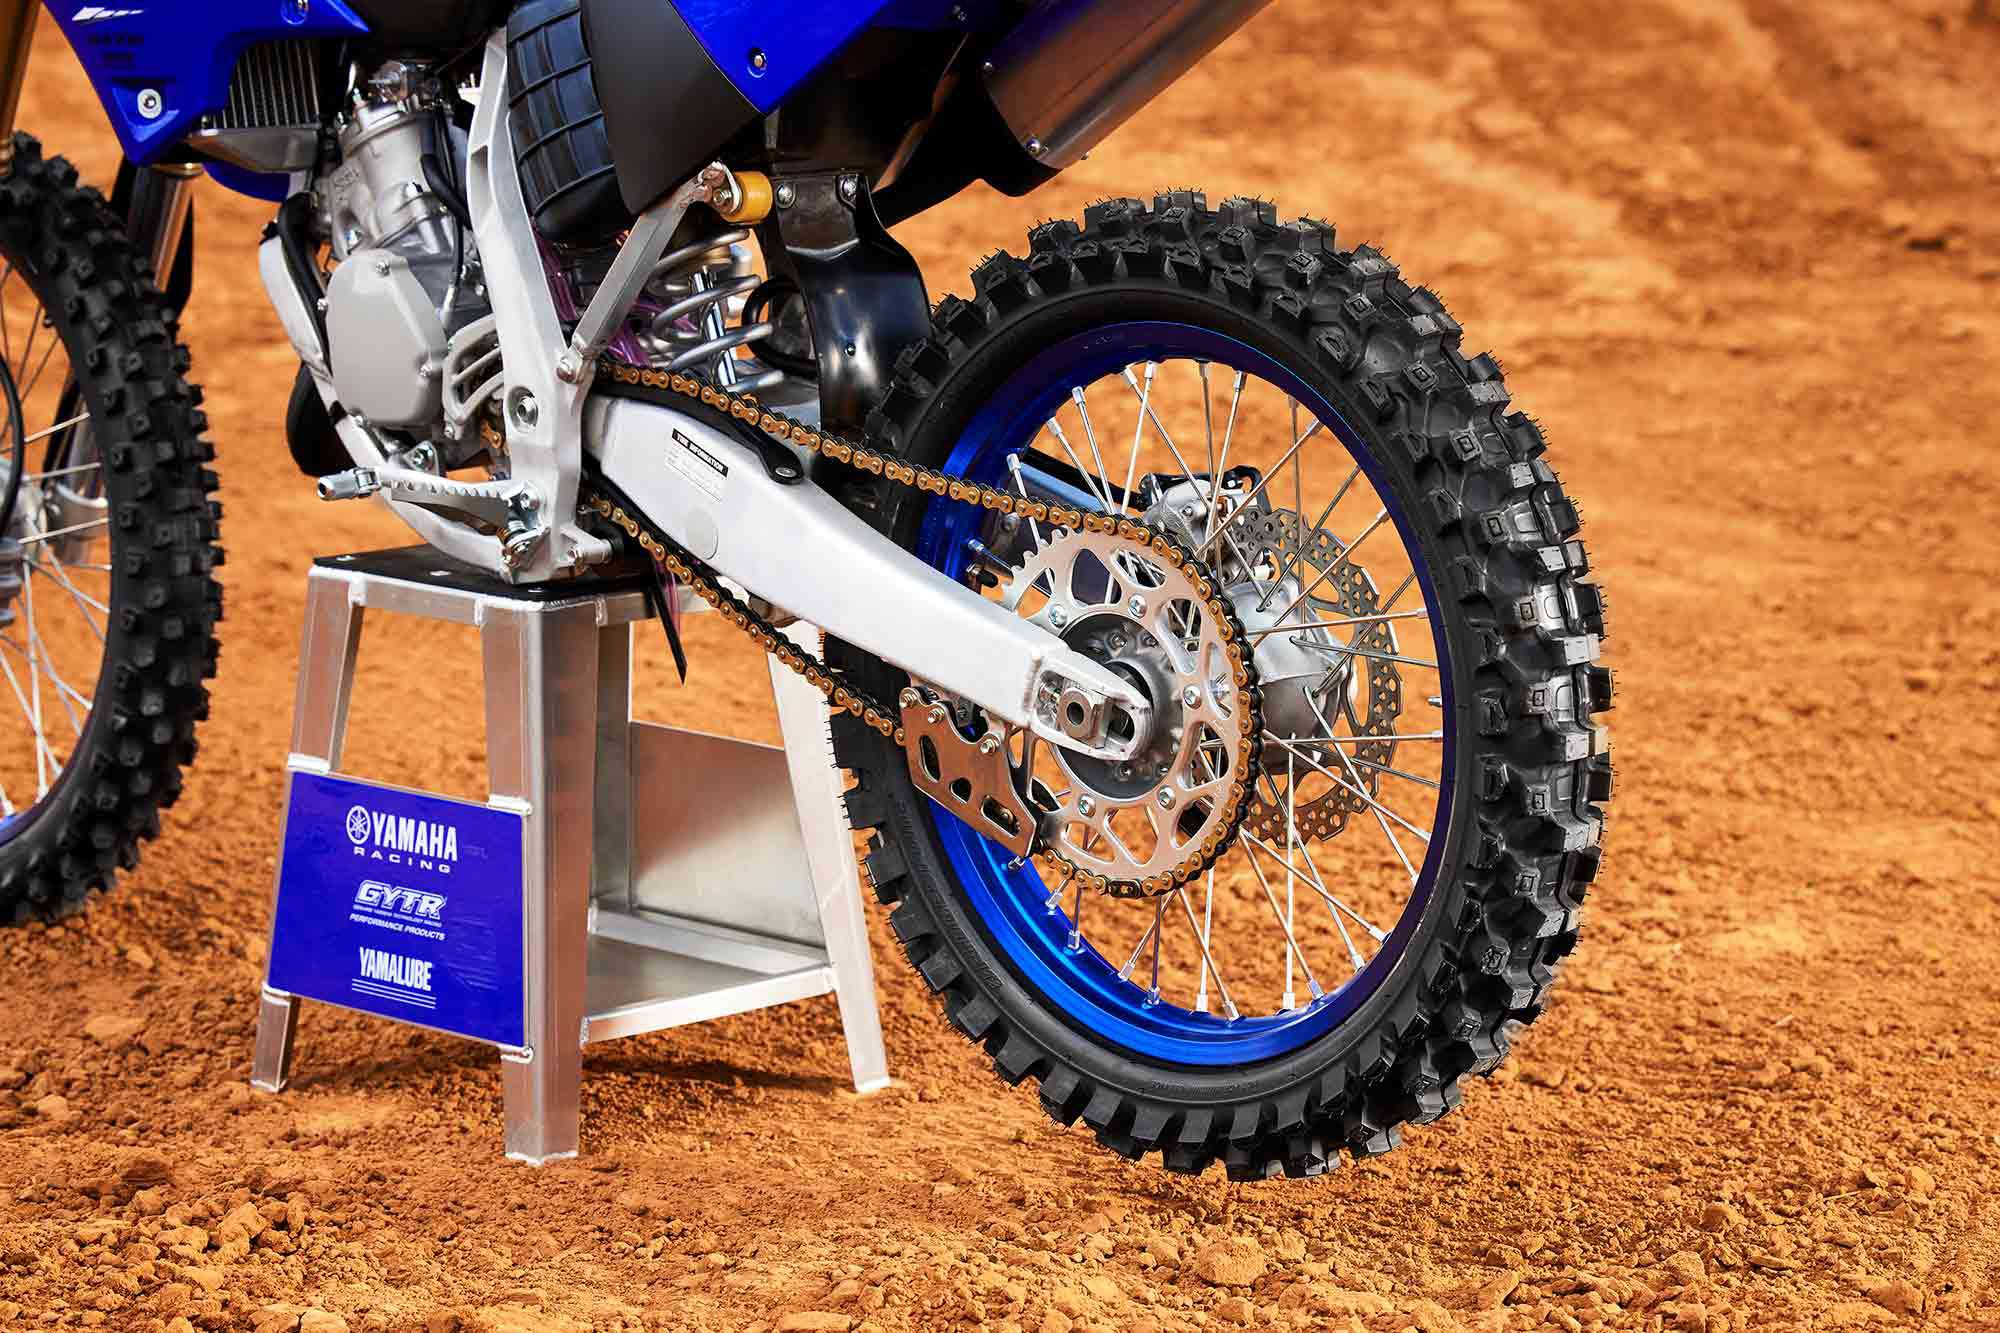 The YZ125 gets a new chain, rear sprocket, revised braking components, and updated suspension.